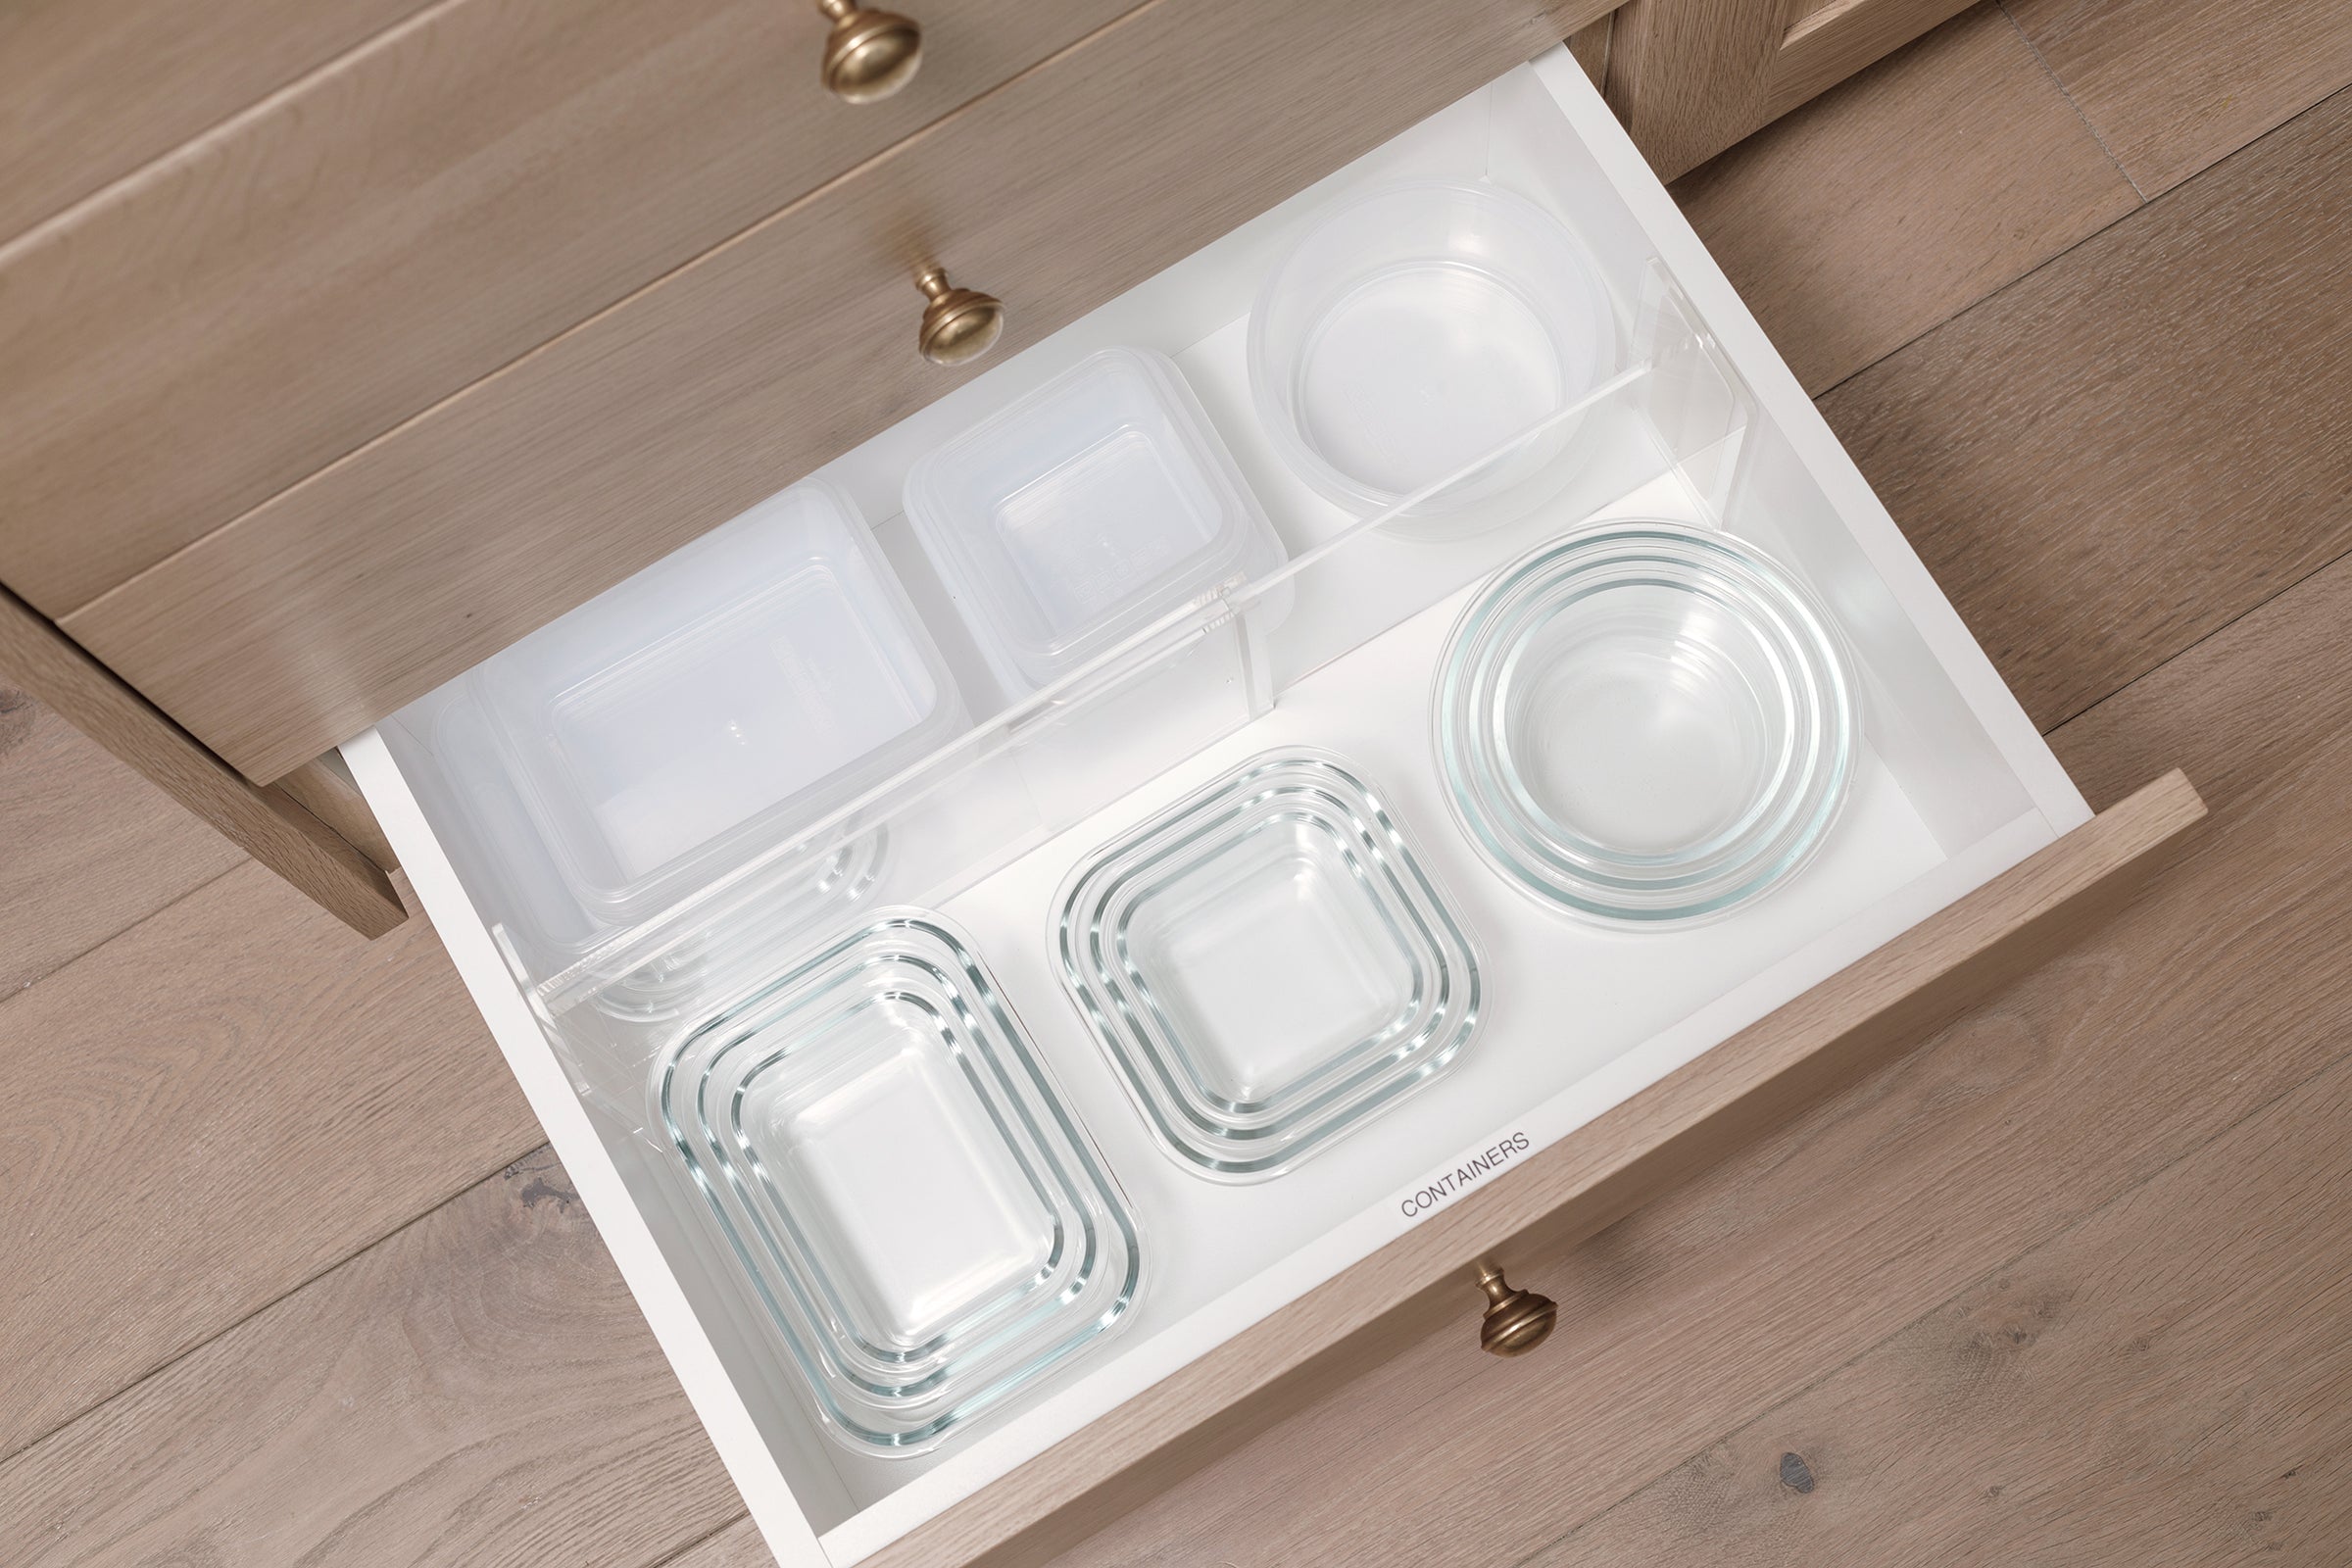 Premium Acrylic Drawer Dividers for Crystal-Clear Organization